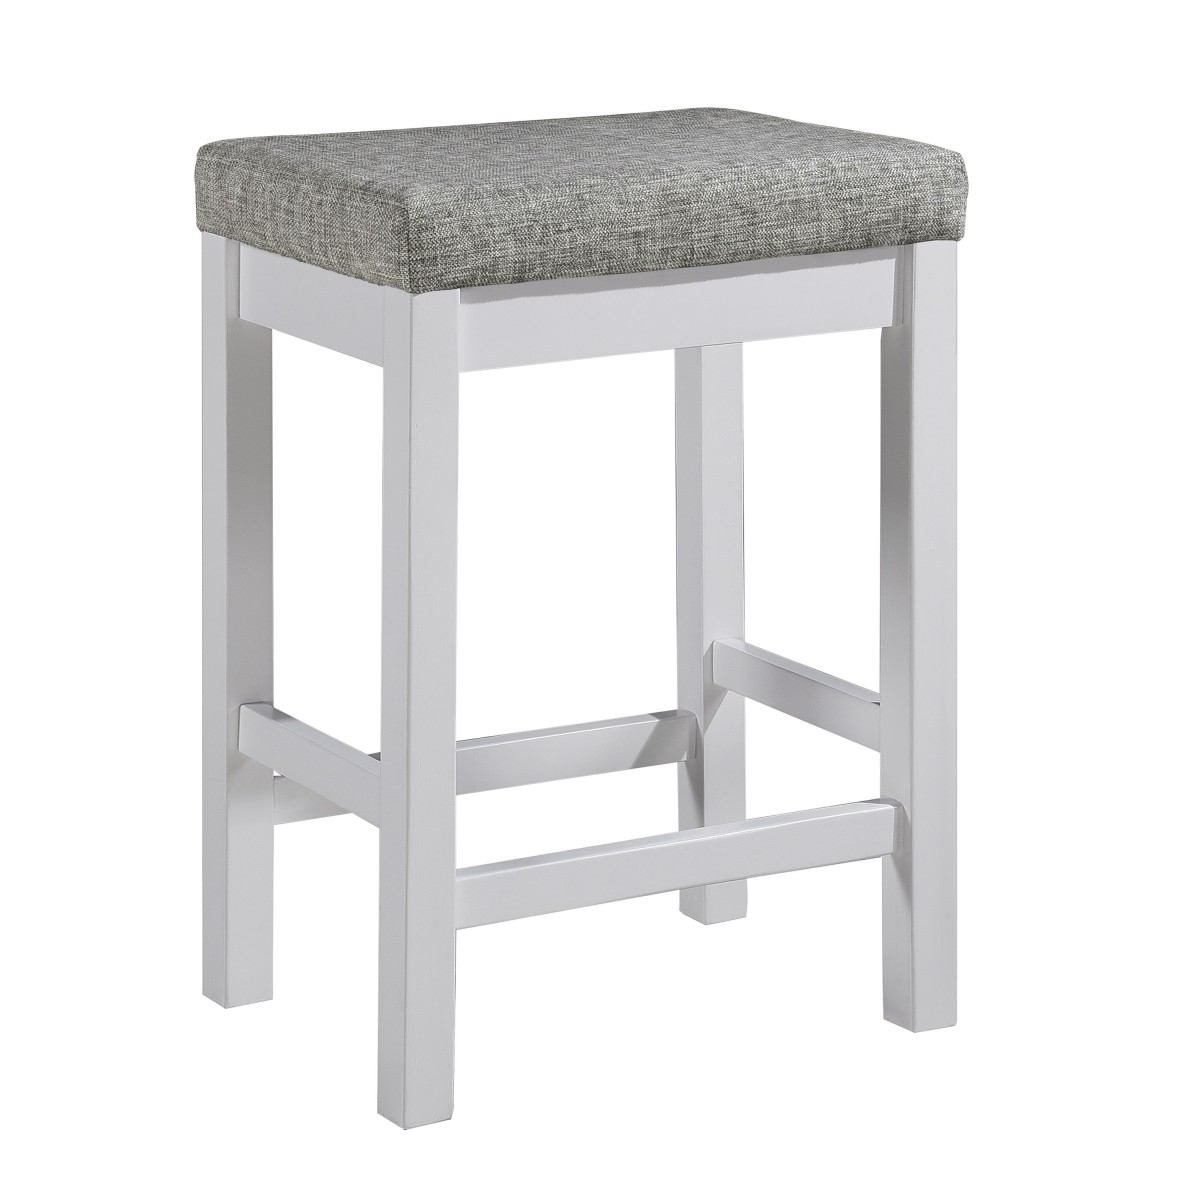 1 Drawer Counter Height Table With Backless Stools,Set Of 4,White And Gray- Saltoro Sherpi